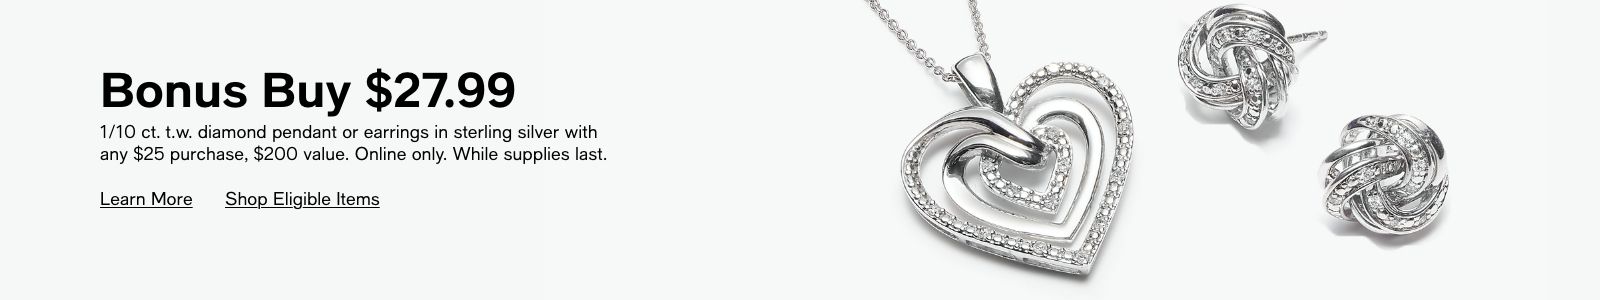 Bonus Buy $27.99, 1/10 ct. t.w, diamond pendent or earrings in sterling silver with any $25 purchase, $200 value, Online only, While supplies last